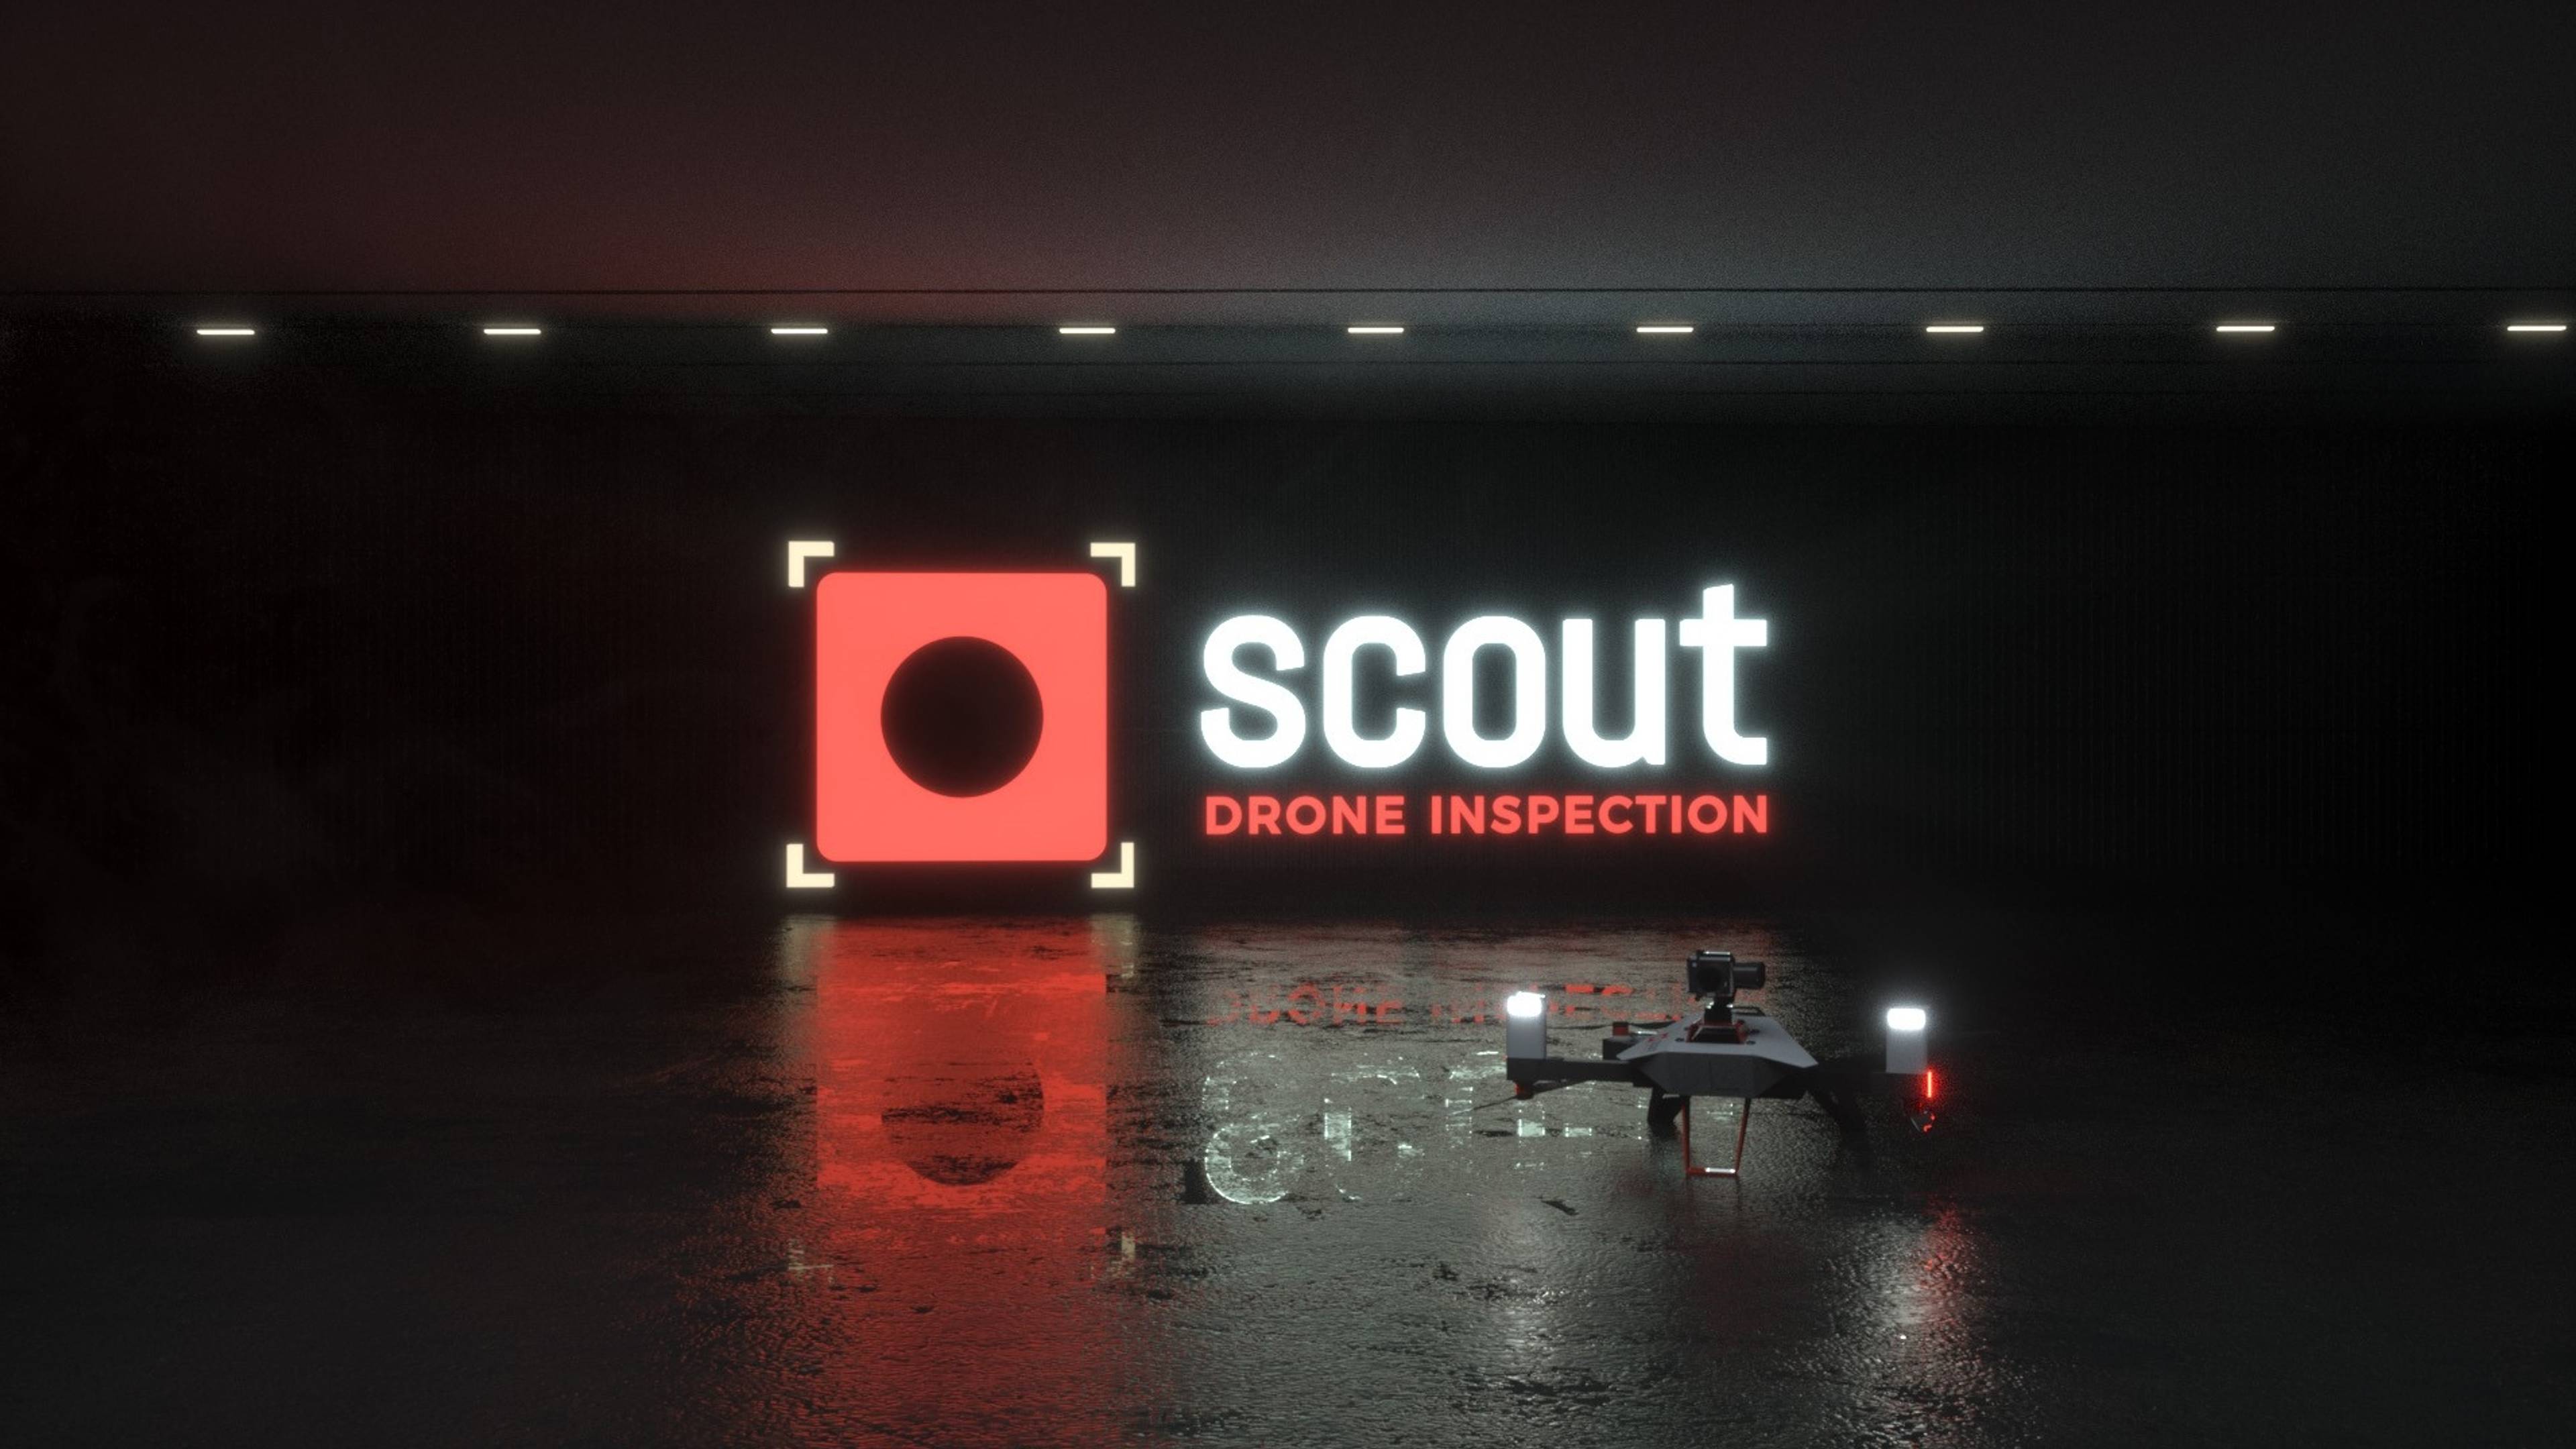 Image of Scout Drone Inspection logo and a drone